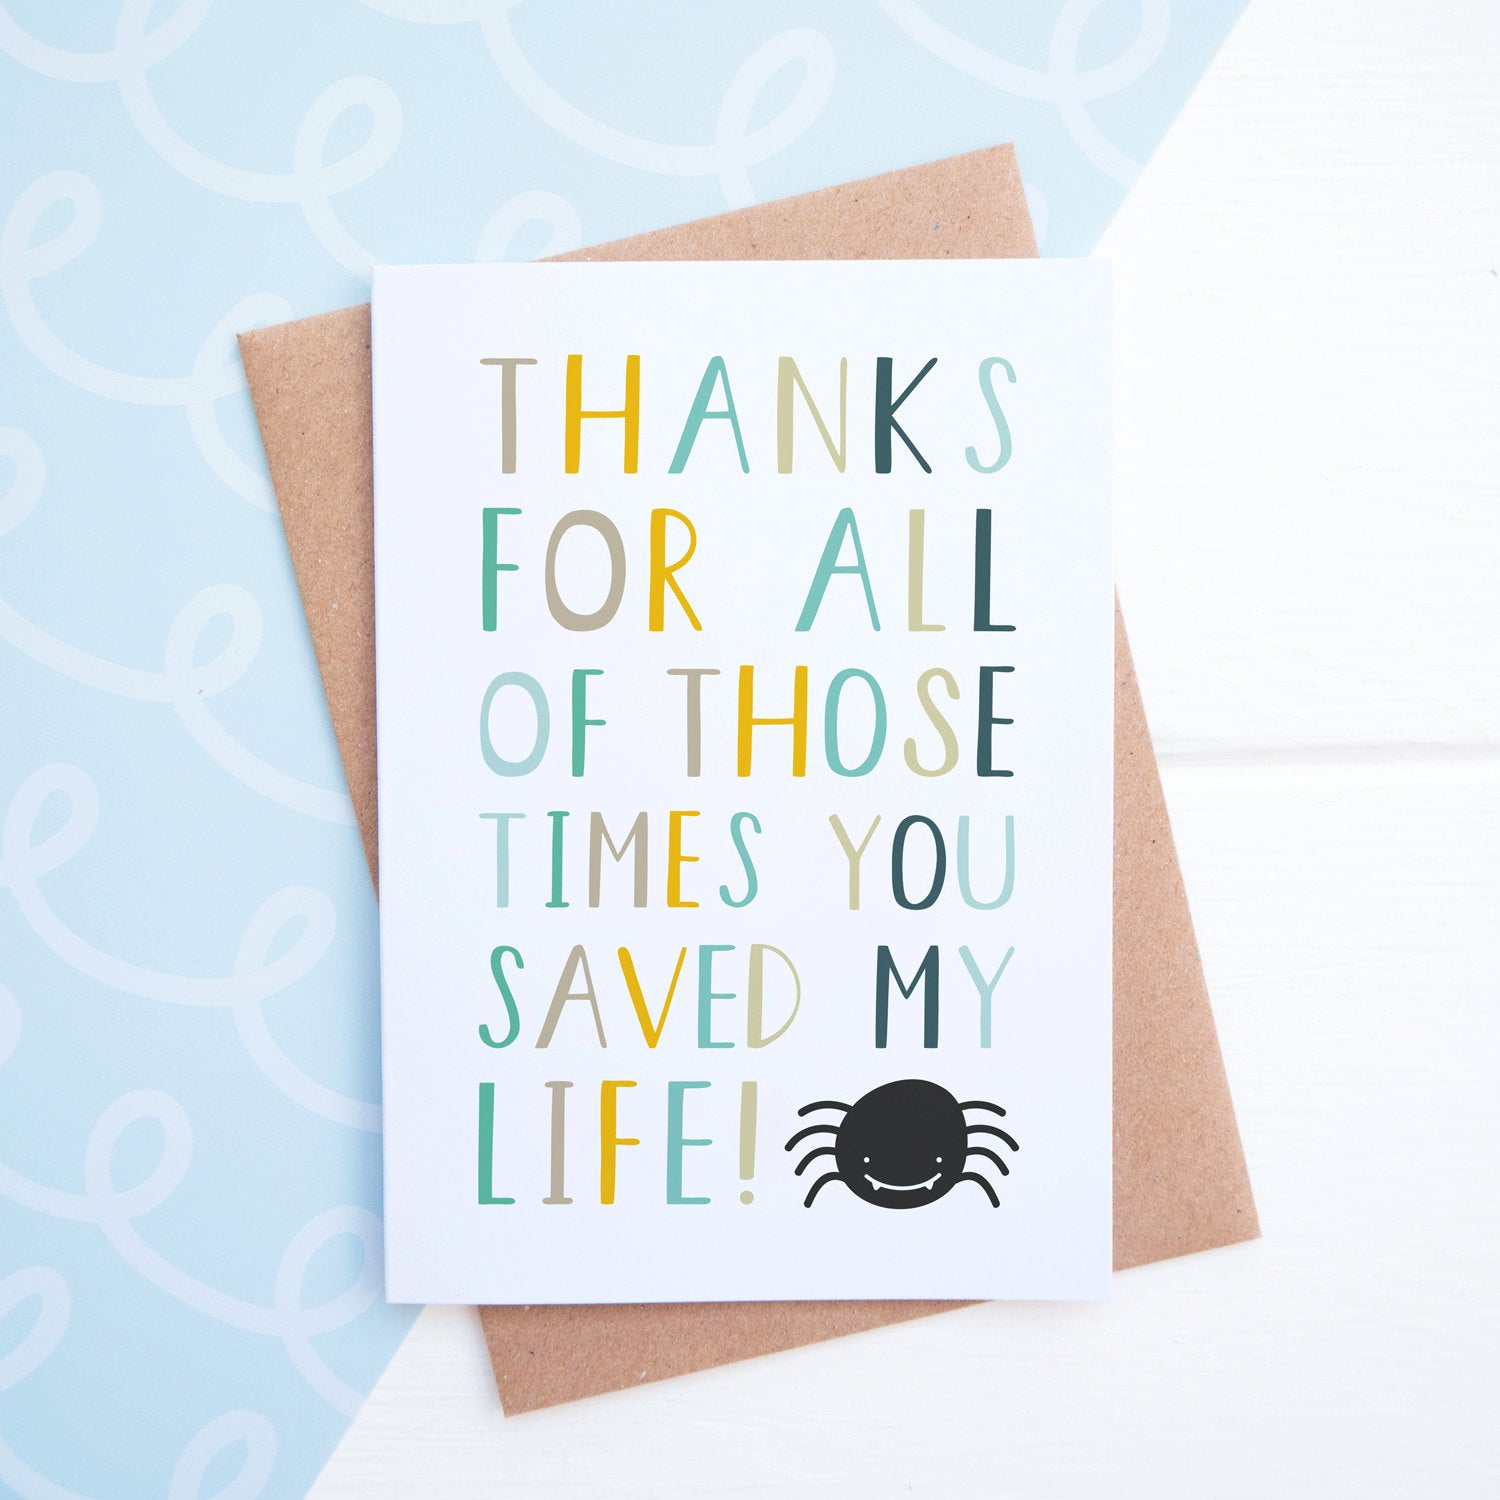 Thanks for all of those times you saved my life fathers day card in blue